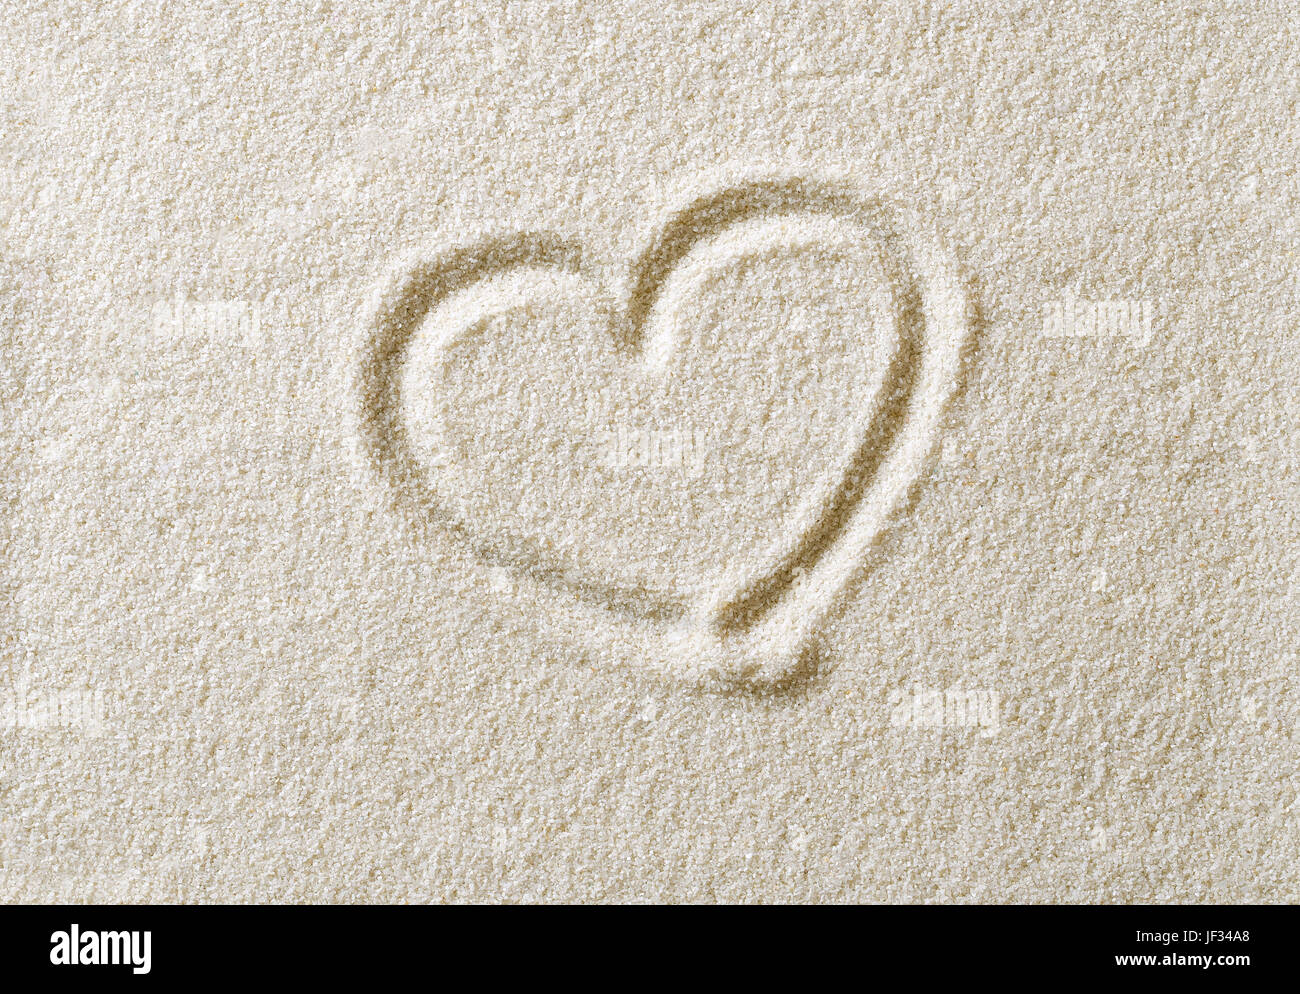 Heart symbol drawn in sand surface. Heart shape, an ideograph to express emotion like romantic love. Metaphoric. Macro photo close up from above. Stock Photo